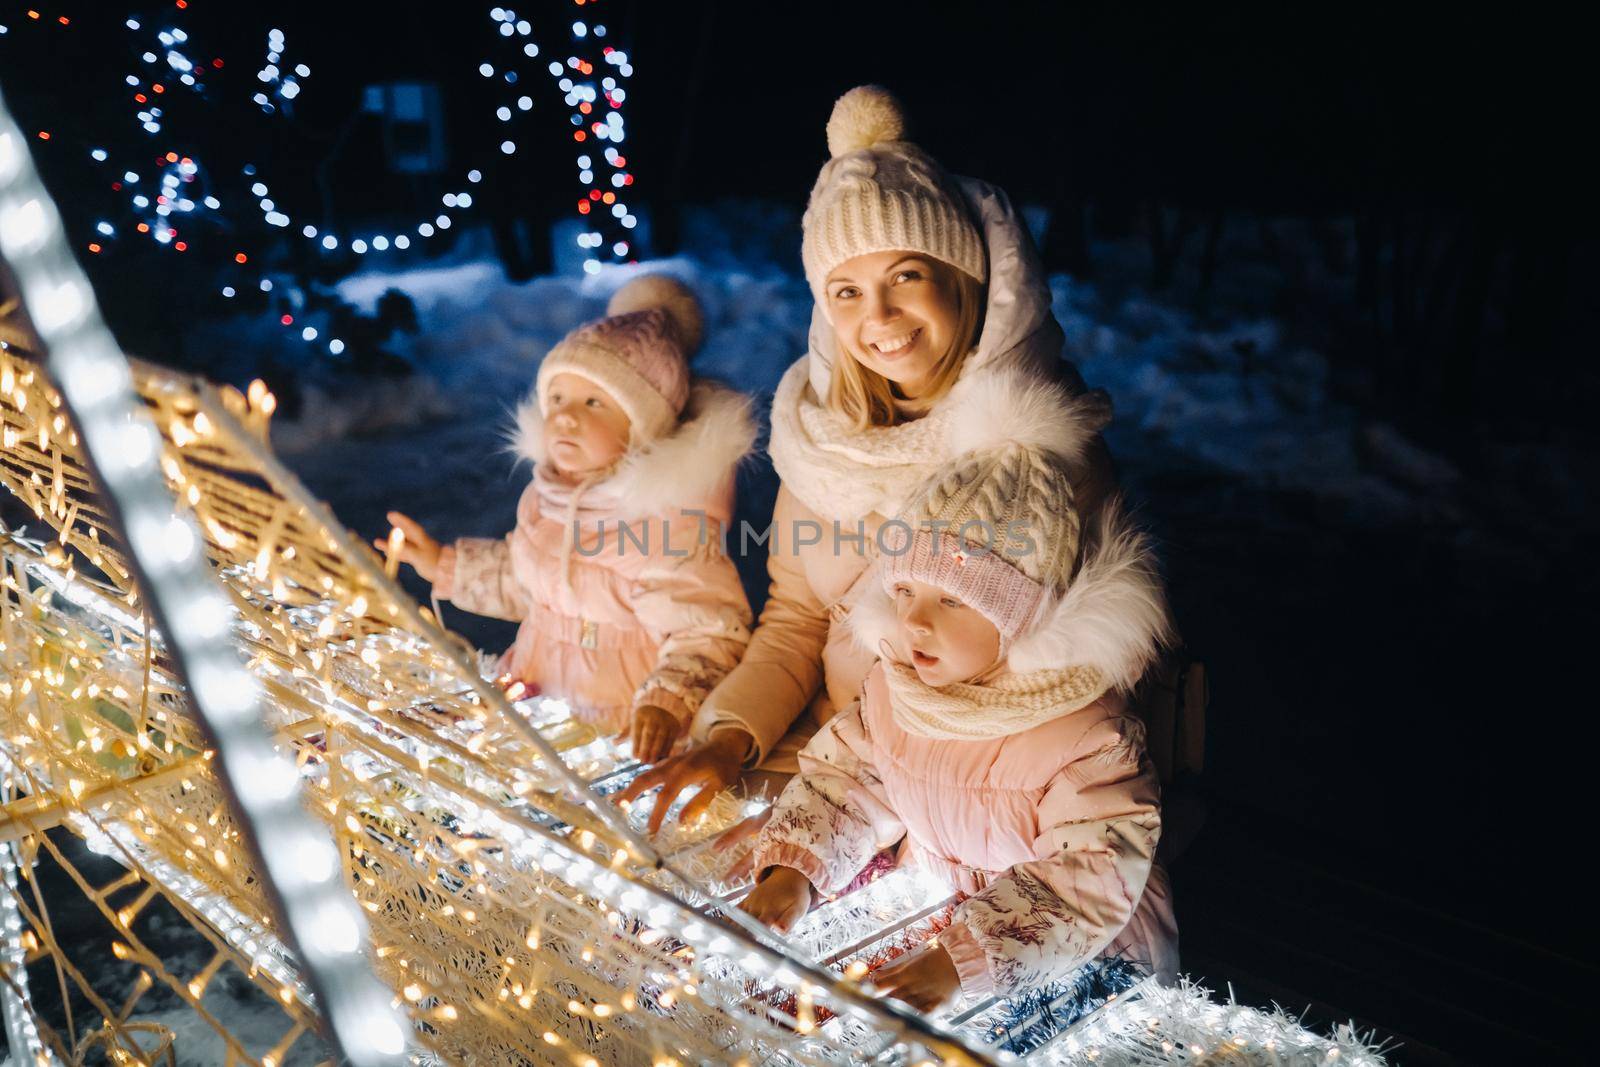 Mom and kids in the evening city with night Christmas lights.